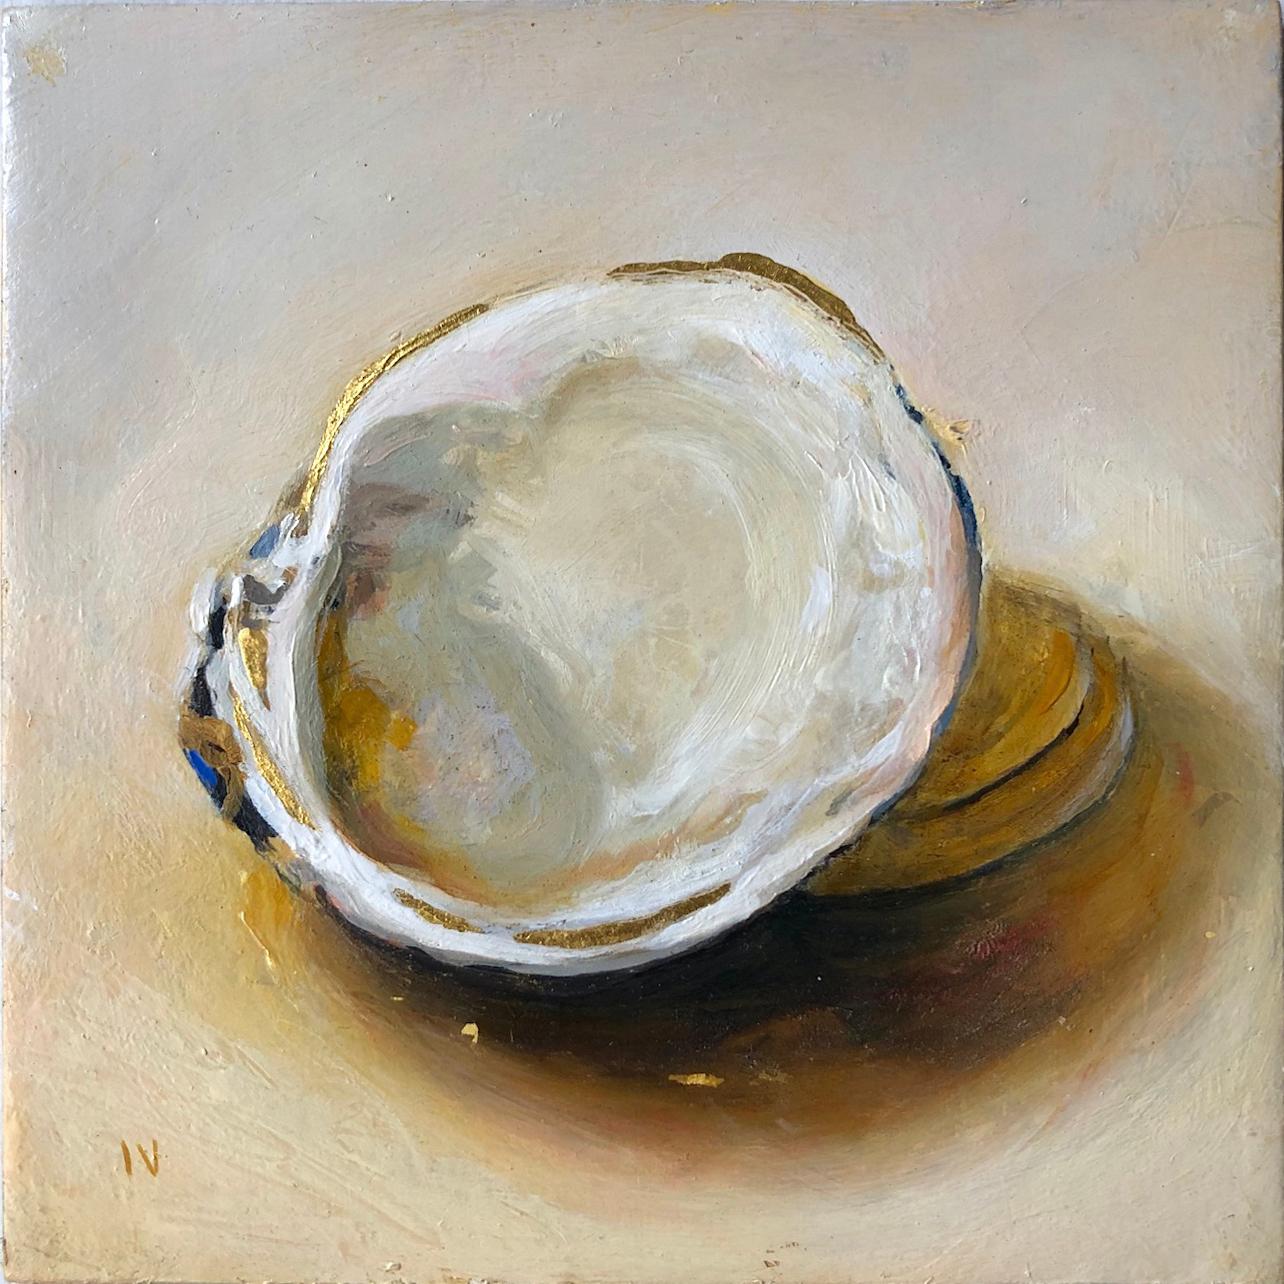 Clams #2 (Contemporary Realist Still Life Oil of Shells with Gold Leaf, Framed) - Mixed Media Art by Matthew Hopkins